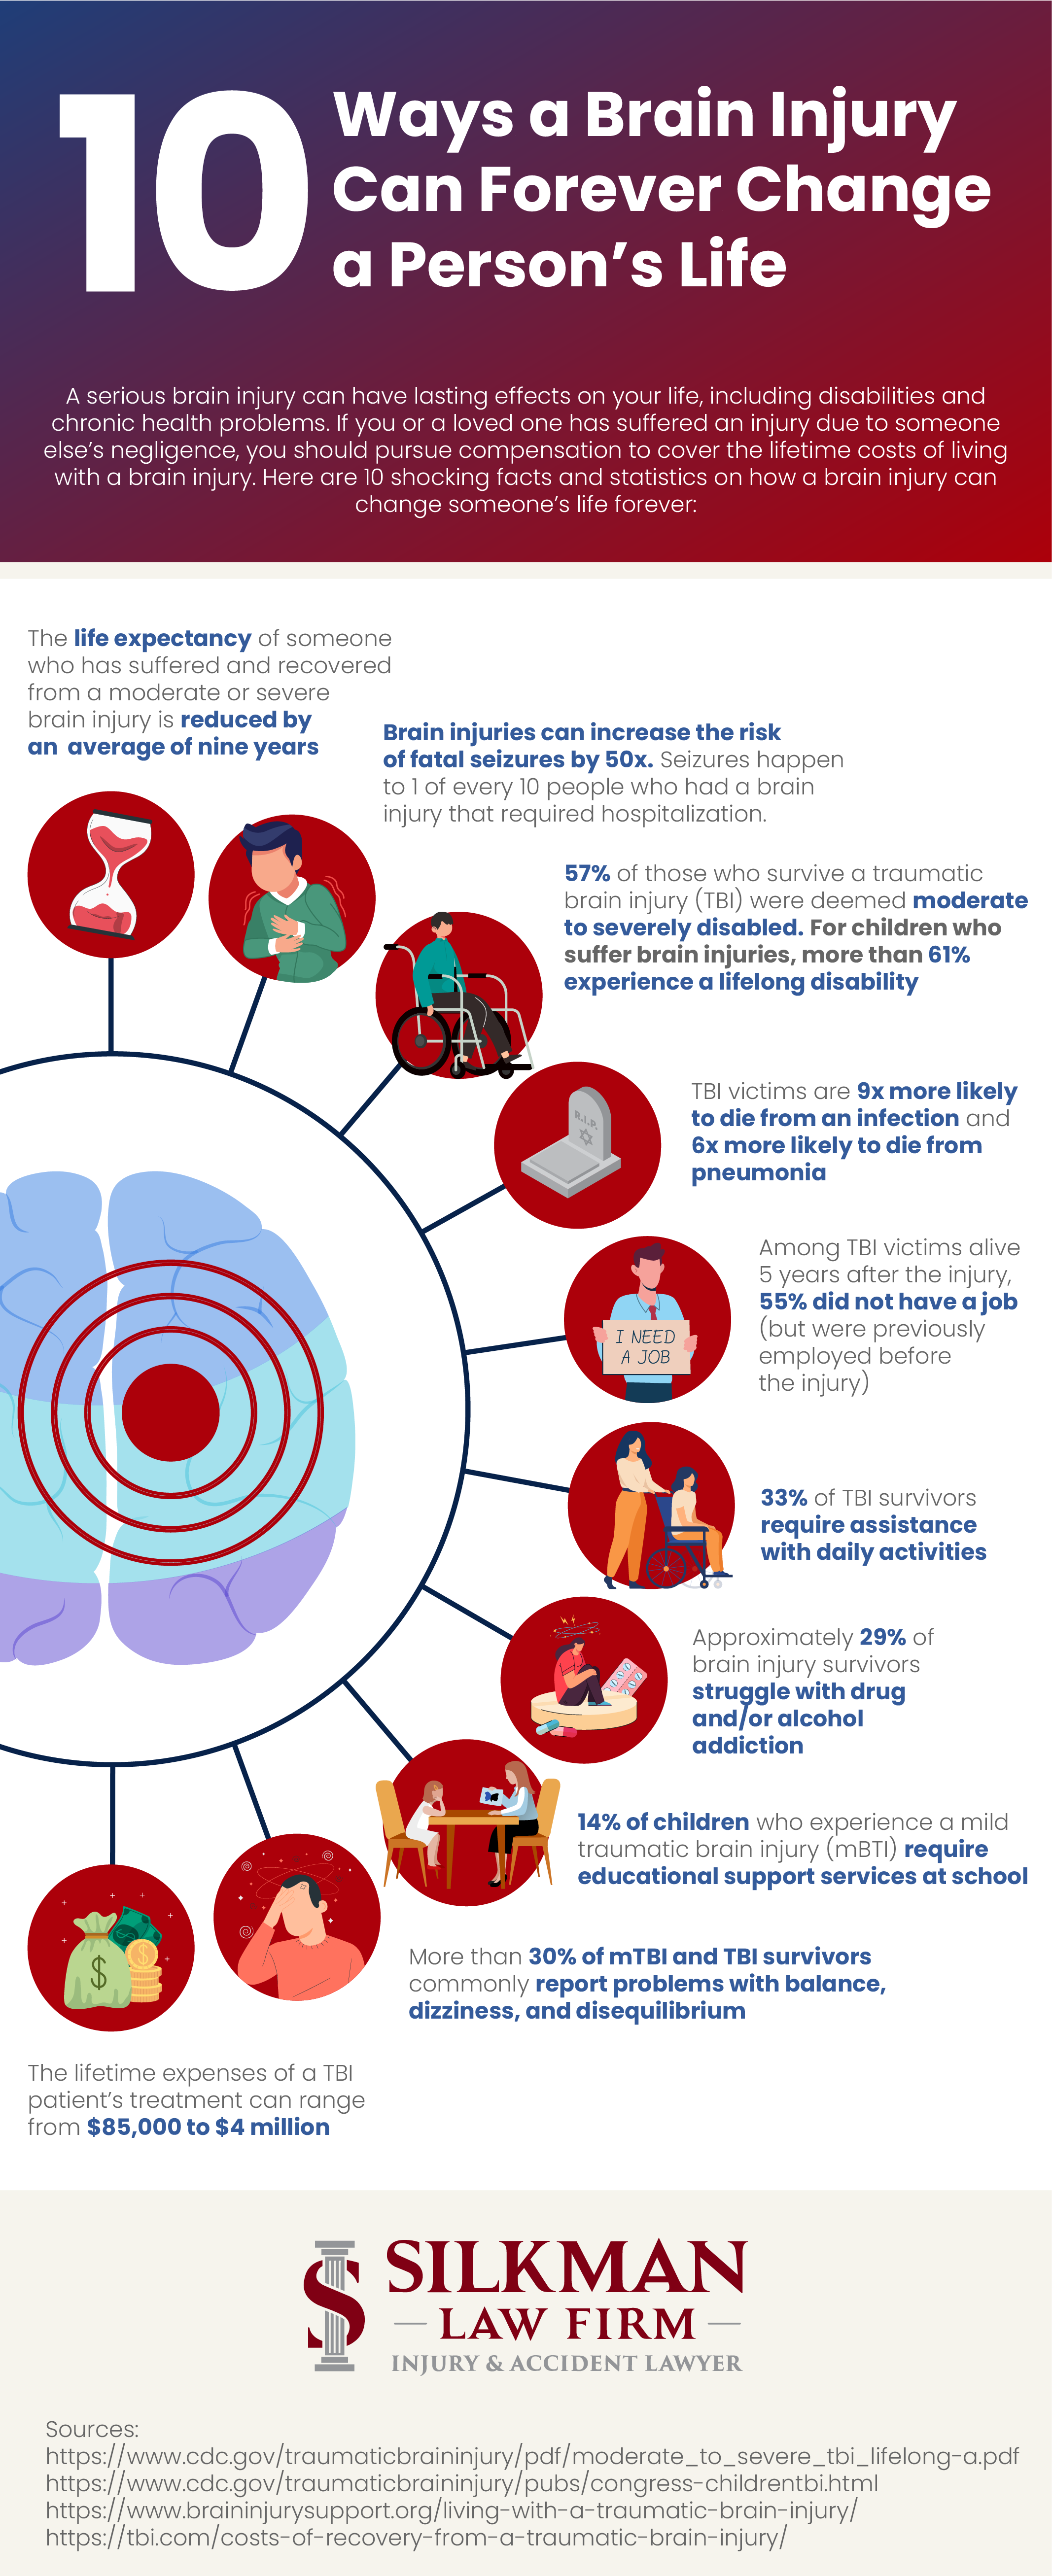 an infographic with 10 ways a brain injury can forever change a person's life